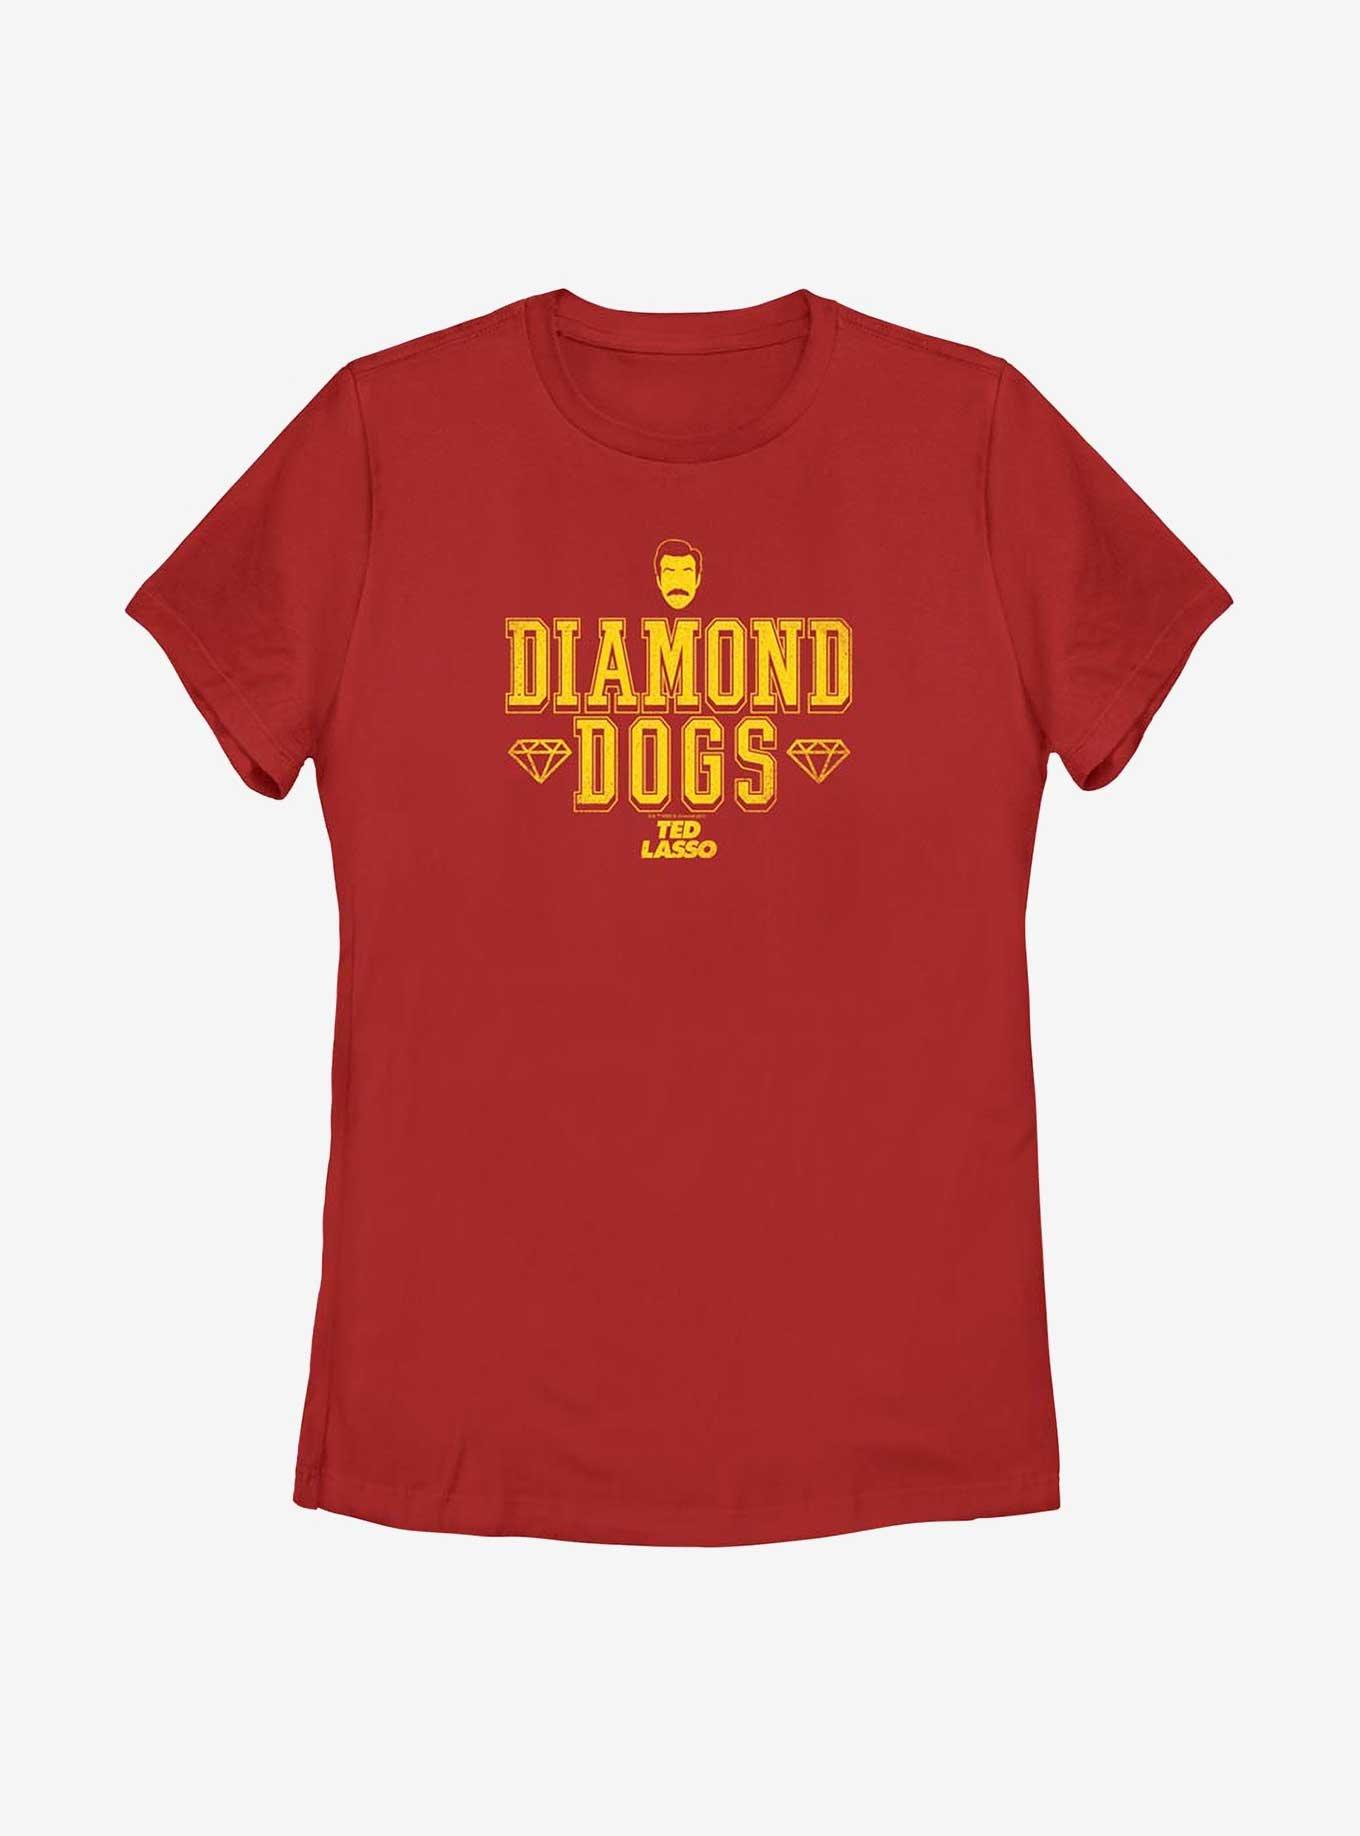 Ted Lasso Diamond Dogs Womens T-Shirt, RED, hi-res